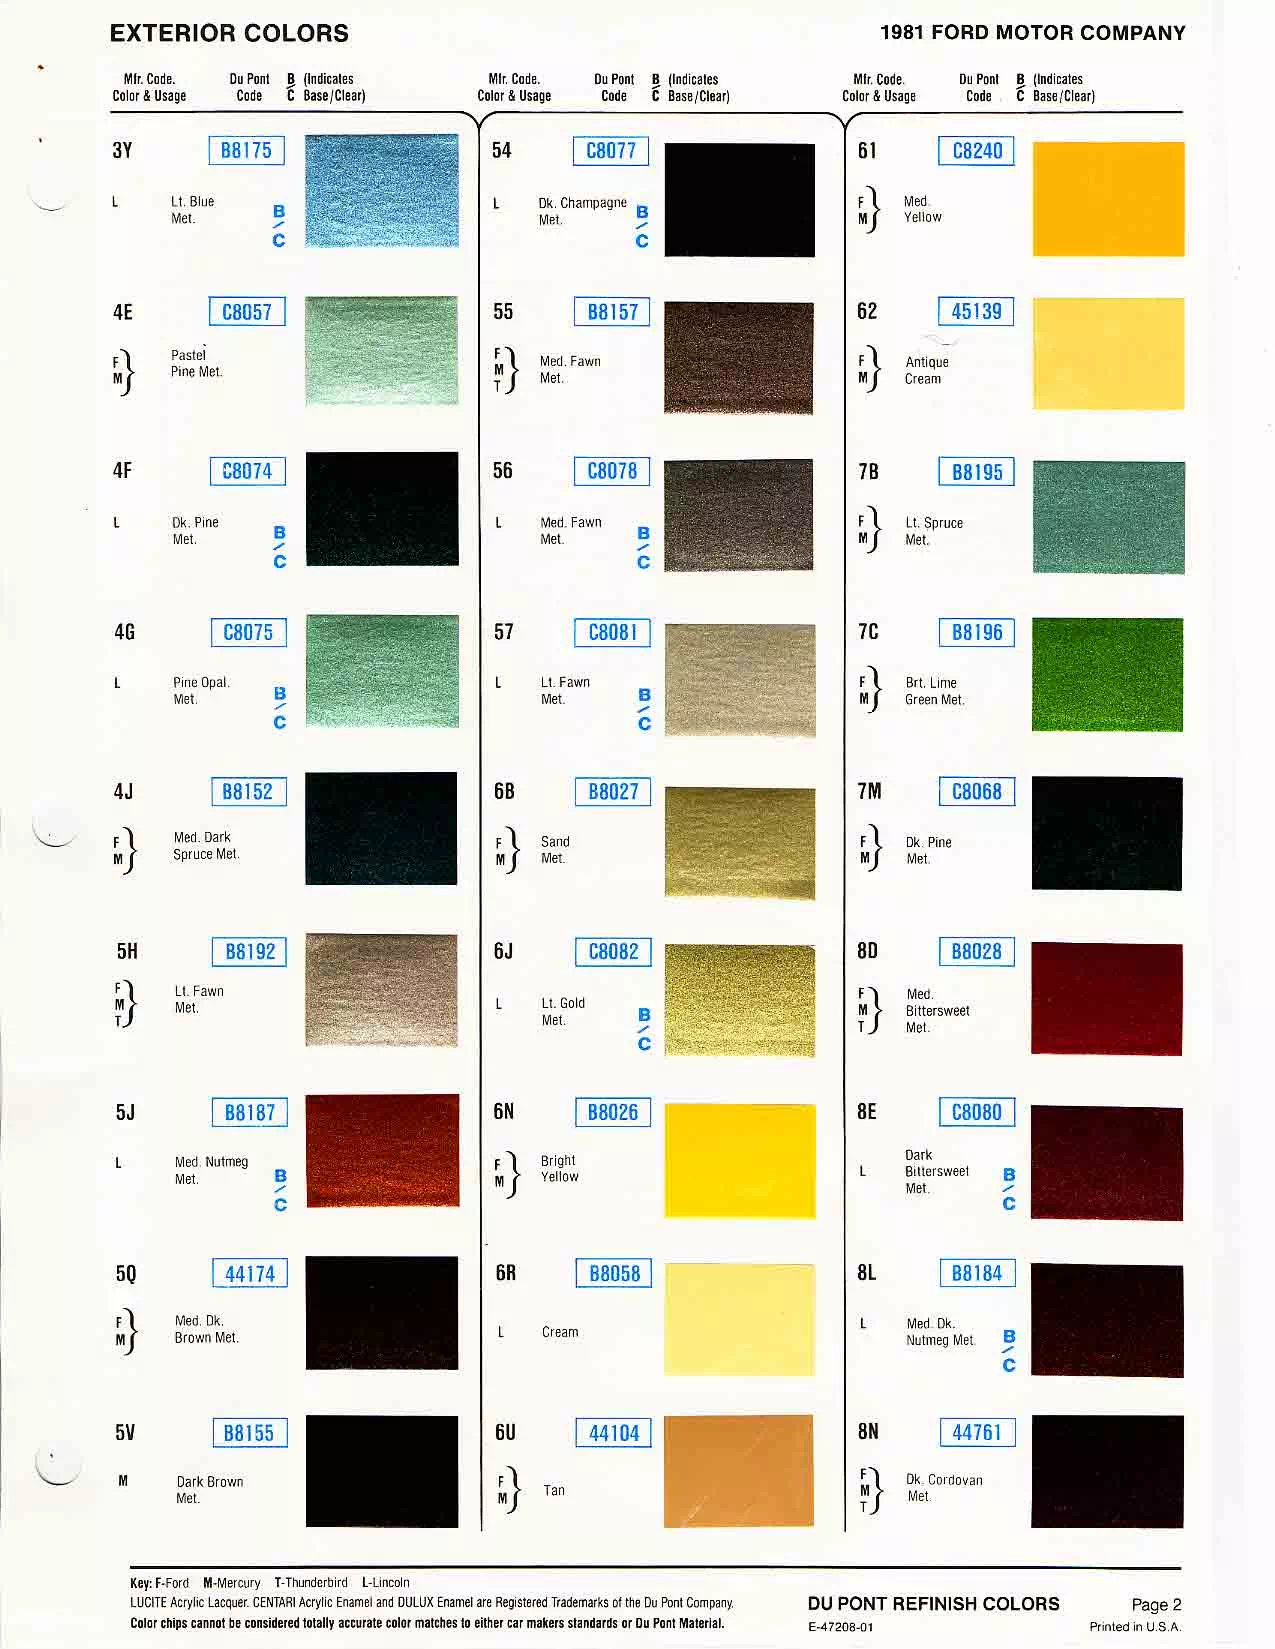 Paint Codes and Color examples used on Ford Motor Company Vehicles in 1981